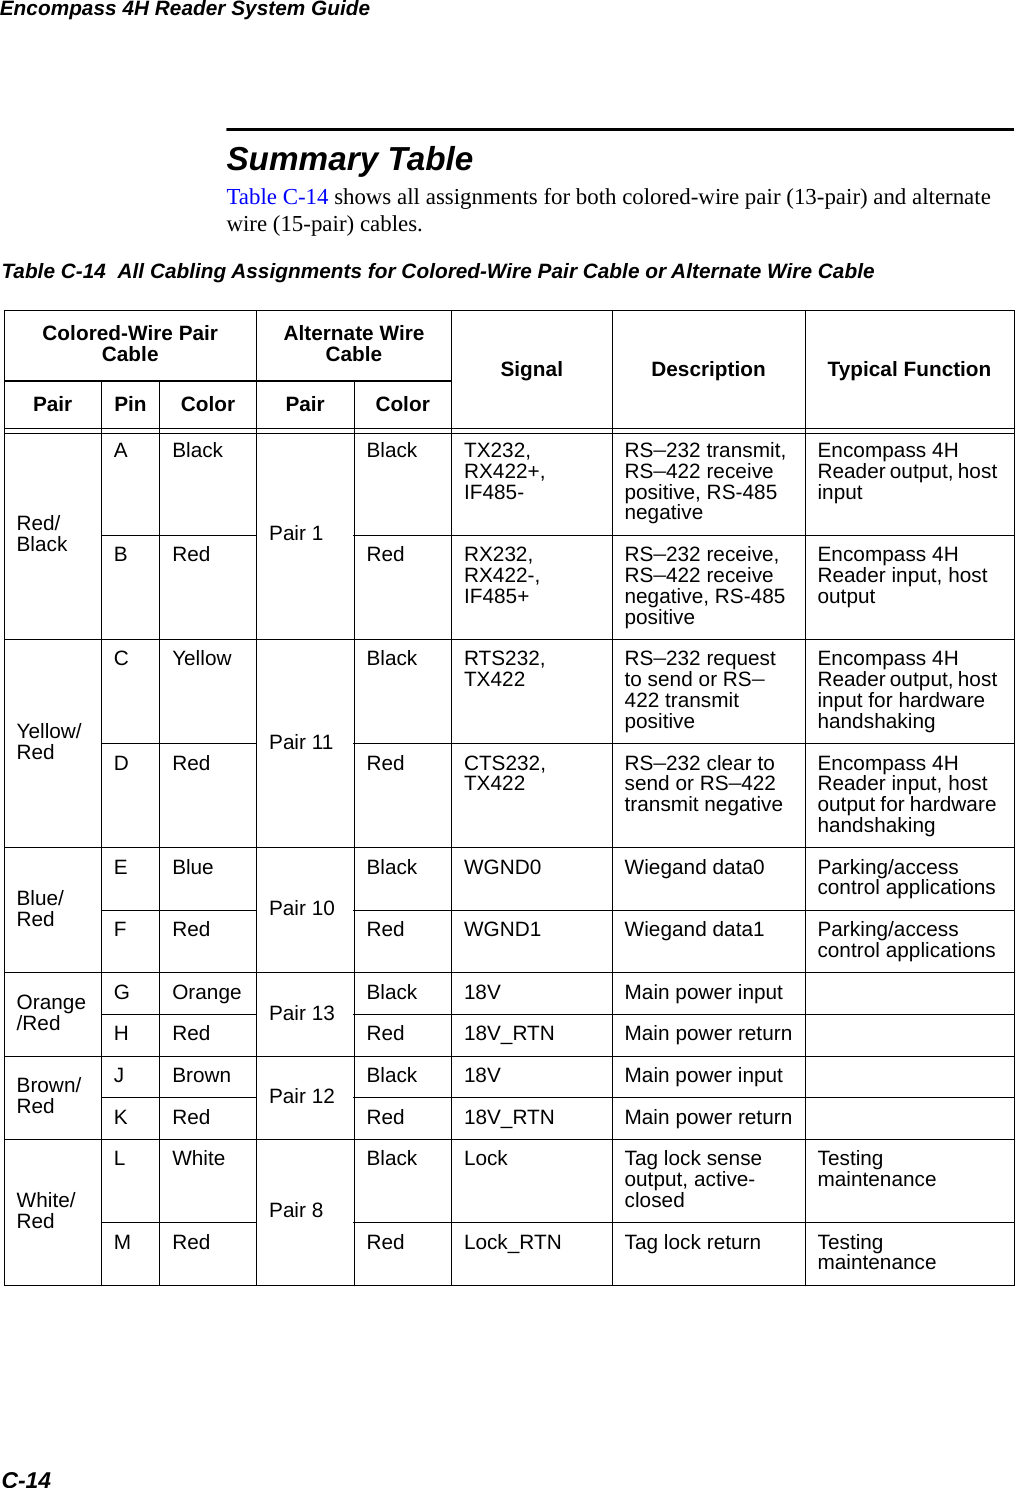 Encompass 4H Reader System GuideC-14Summary TableTable C-14 shows all assignments for both colored-wire pair (13-pair) and alternate wire (15-pair) cables.Table C-14  All Cabling Assignments for Colored-Wire Pair Cable or Alternate Wire Cable Colored-Wire Pair Cable Alternate Wire Cable Signal Description Typical FunctionPair Pin Color Pair ColorRed/BlackABlackPair 1Black TX232,RX422+, IF485-RS–232 transmit, RS–422 receive positive, RS-485 negativeEncompass 4H Reader output, host inputBRed Red RX232, RX422-, IF485+RS–232 receive, RS–422 receive negative, RS-485 positiveEncompass 4H Reader input, host outputYellow/RedCYellowPair 11Black RTS232, TX422 RS–232 request to send or RS–422 transmit positiveEncompass 4H Reader output, host input for hardware handshakingDRed Red CTS232, TX422 RS–232 clear to send or RS–422 transmit negativeEncompass 4H Reader input, host output for hardware handshakingBlue/RedEBluePair 10Black WGND0 Wiegand data0 Parking/access control applicationsFRed Red WGND1 Wiegand data1 Parking/access control applicationsOrange/RedGOrange Pair 13 Black 18V Main power inputHRed Red 18V_RTN Main power returnBrown/RedJBrown Pair 12 Black 18V Main power inputKRed Red 18V_RTN Main power returnWhite/RedLWhitePair 8Black Lock Tag lock sense output, active-closedTesting maintenanceMRed Red Lock_RTN Tag lock return Testing maintenance